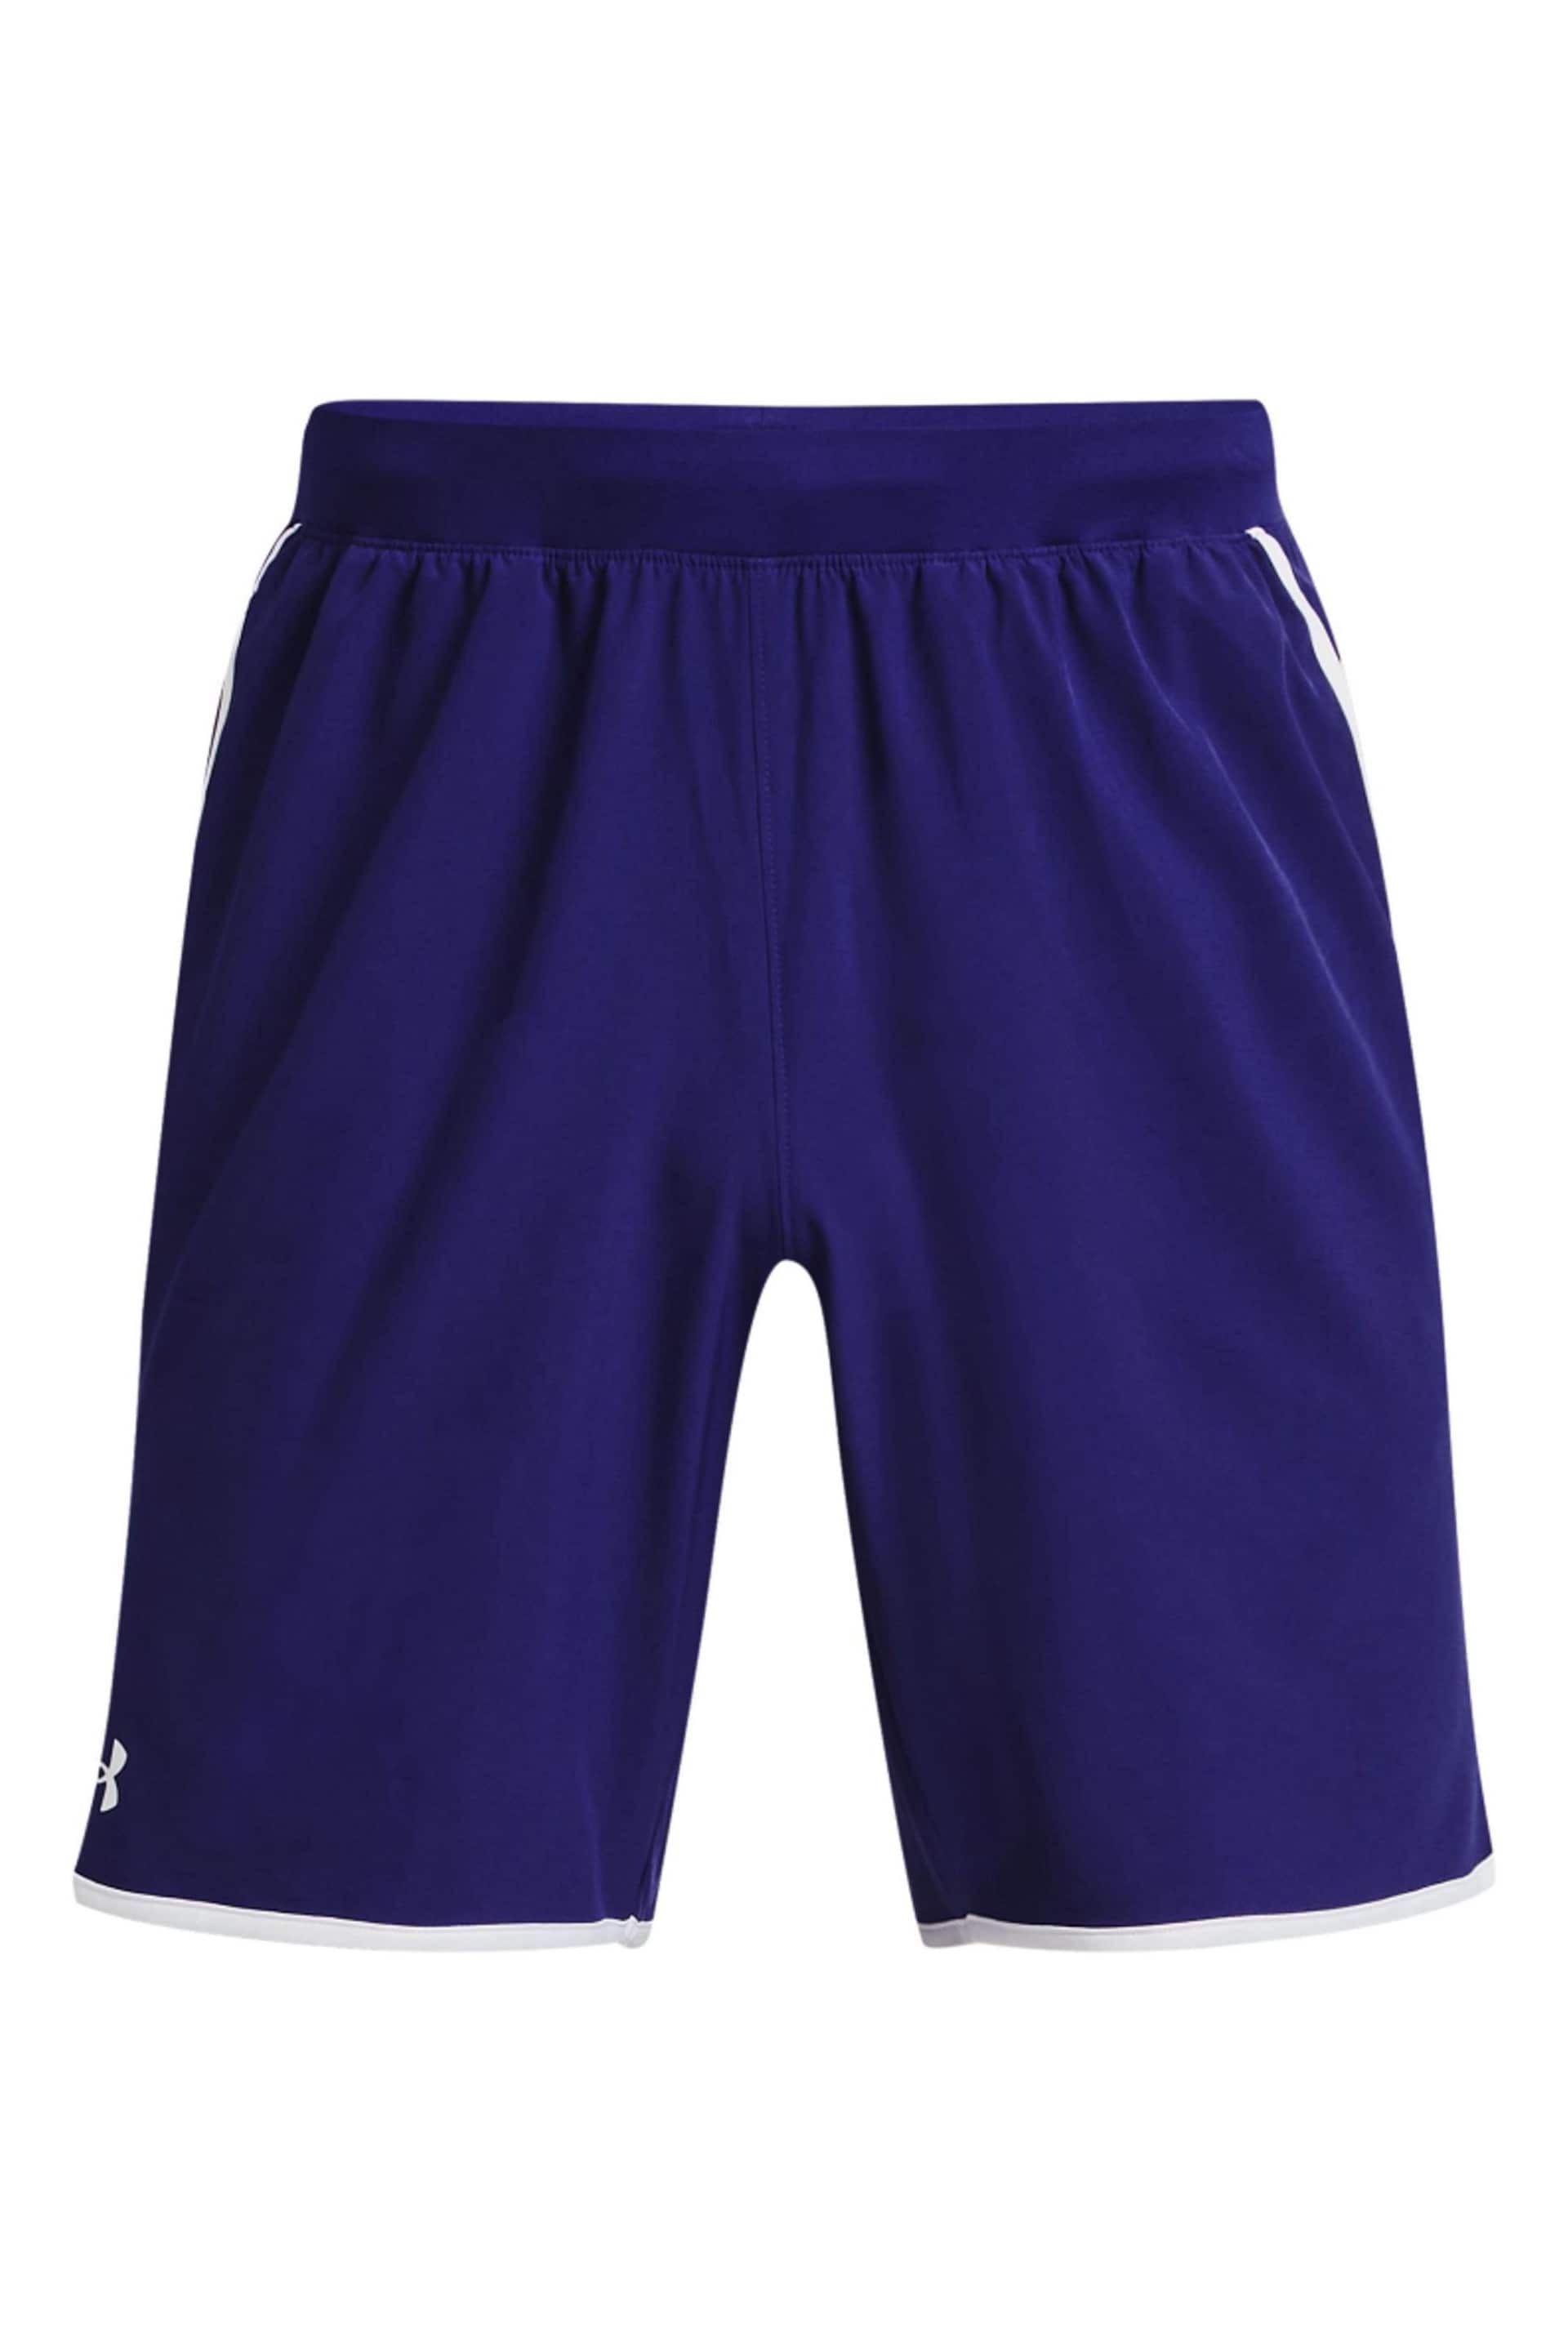 Under Armour Blue HIIT 8 Inch Shorts - Image 5 of 7